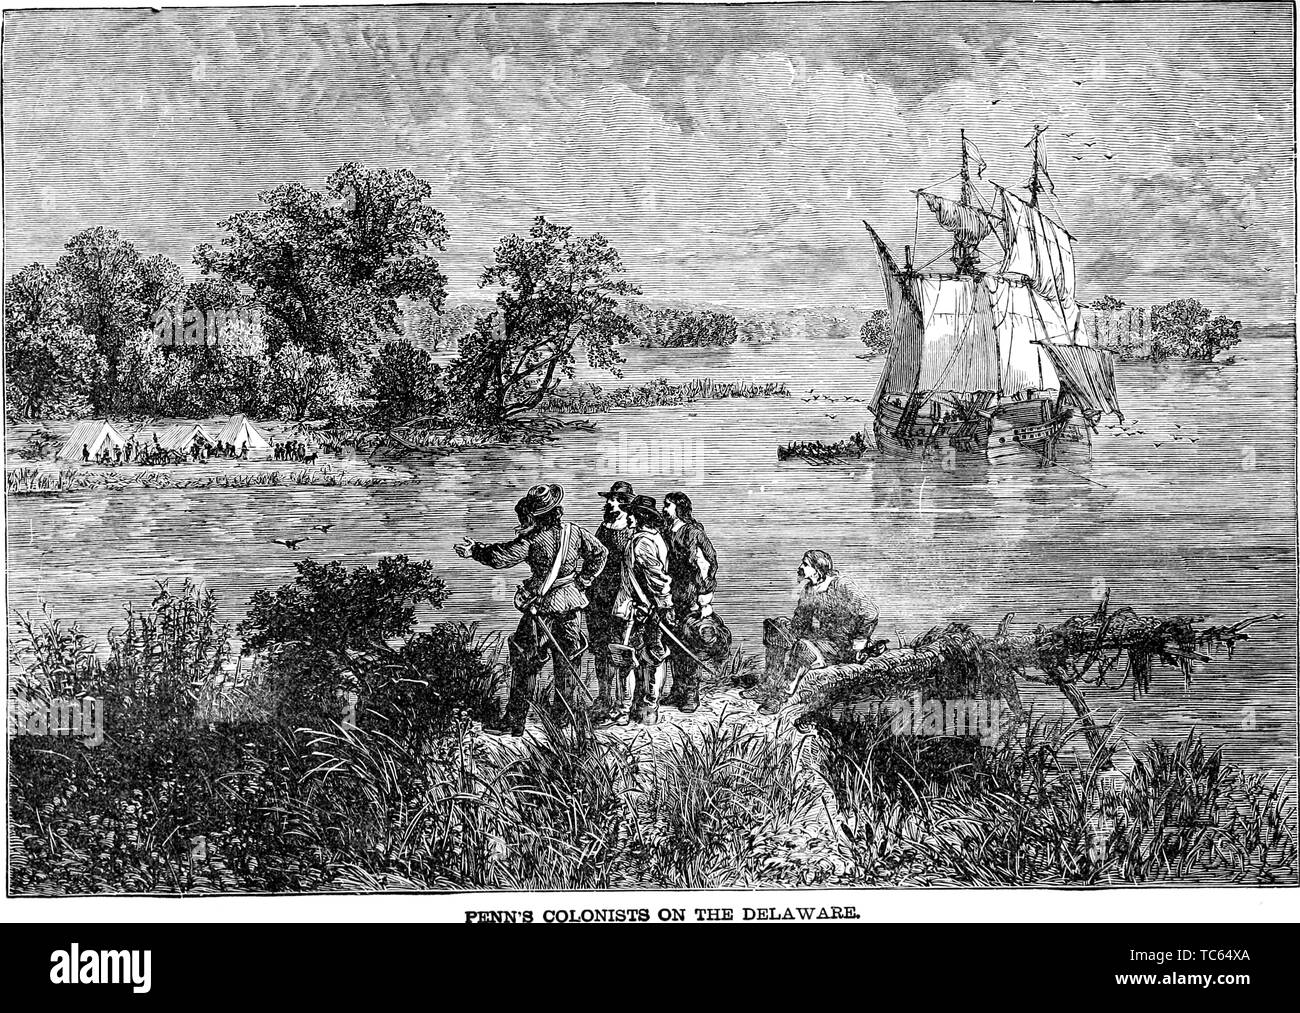 Engraving of the William Penn's colonists on the Delaware River, from the book 'A popular history of the United States of America, from the aboriginal times to the present day' by John Clark Ridpath, 1893. Courtesy Internet Archive. () Stock Photo